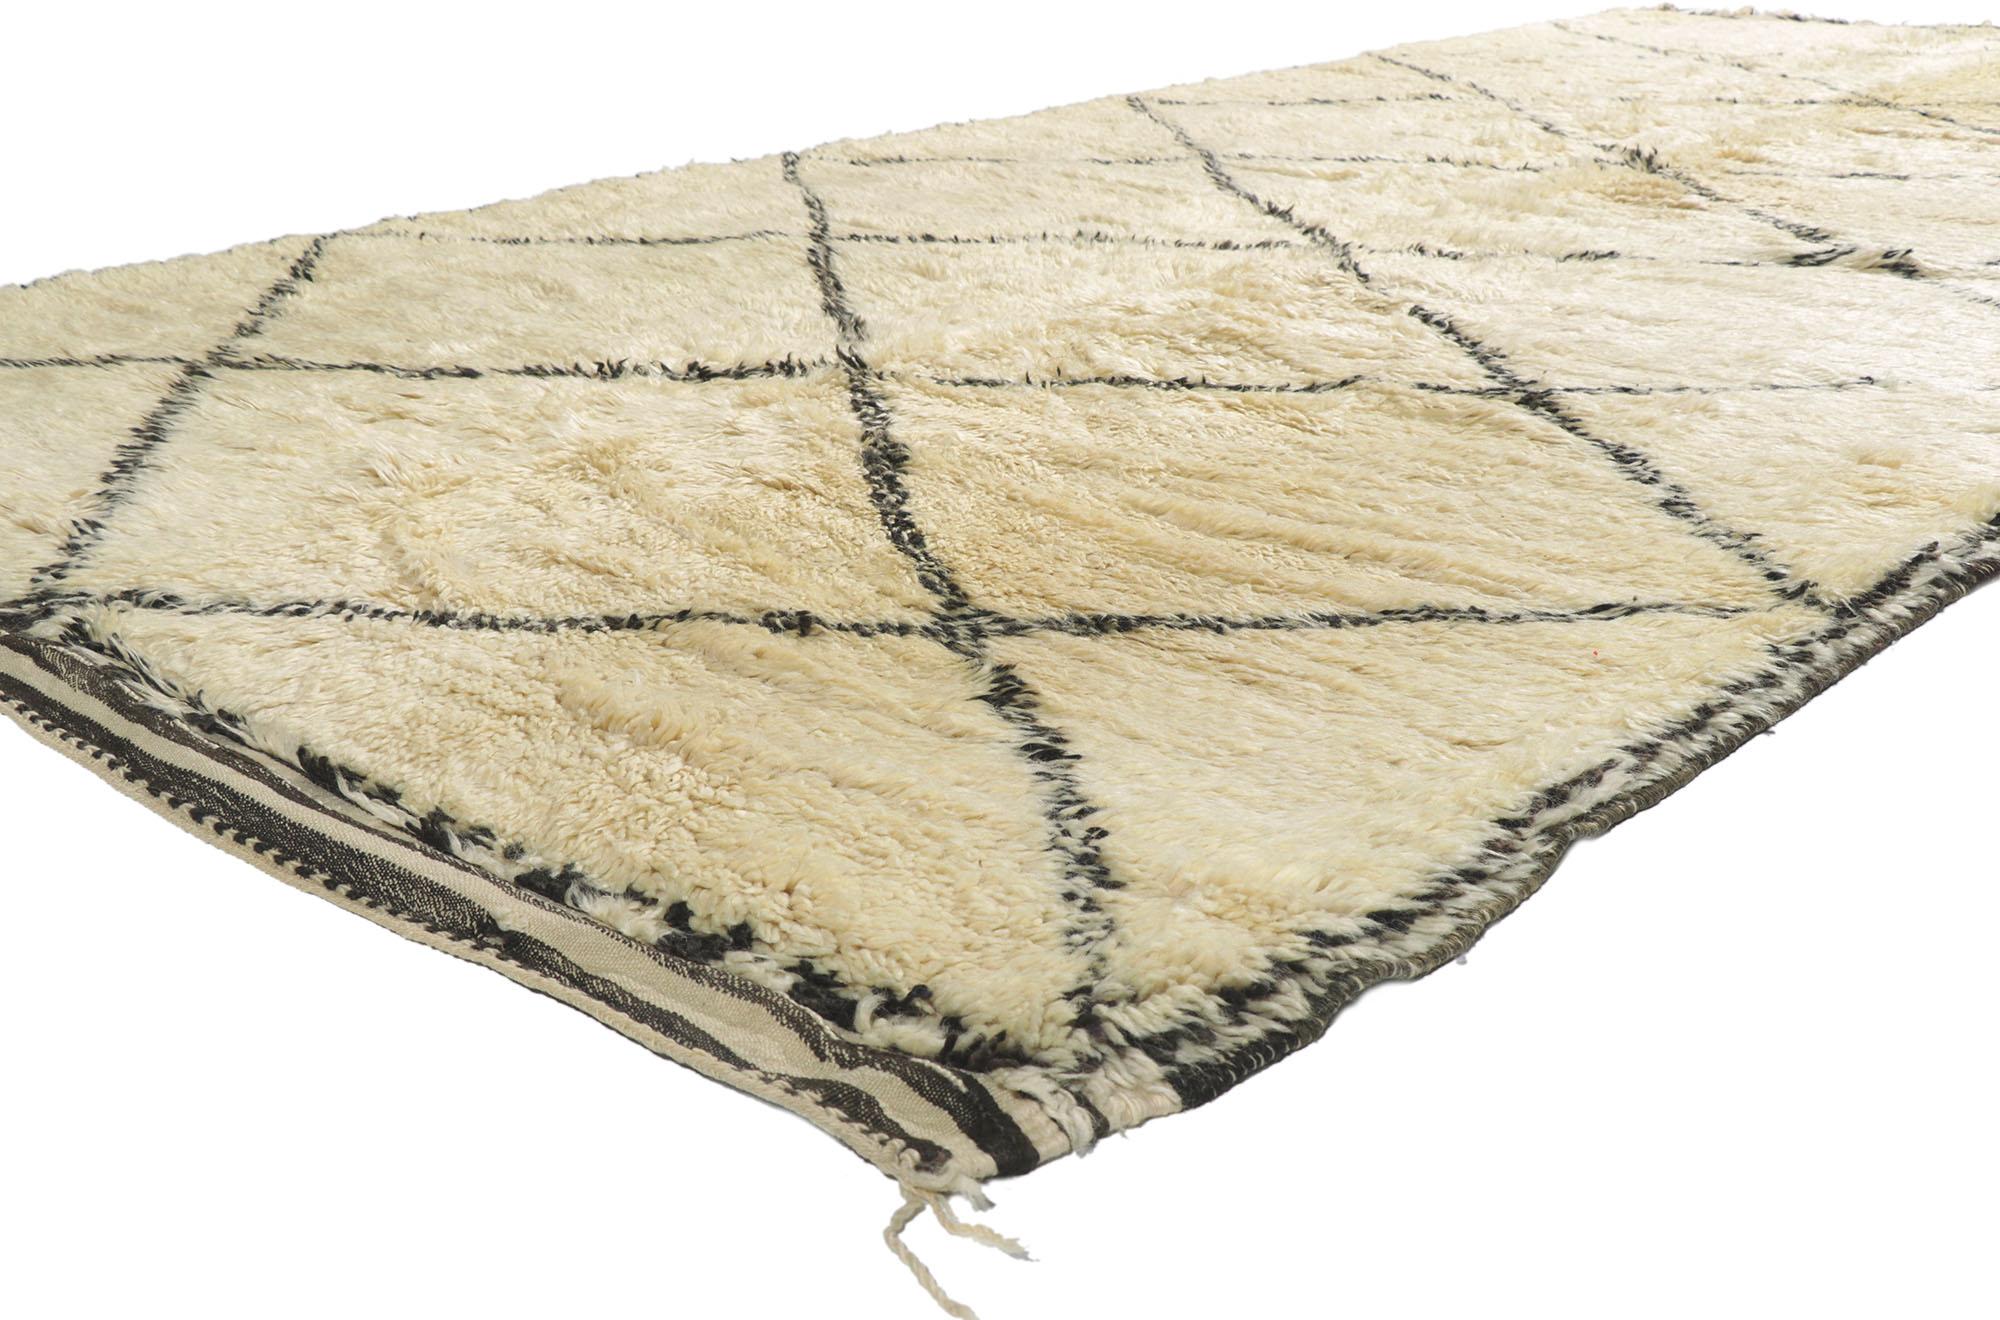 21358 Vintage Moroccan Beni Ourain Rug, 06'07 x 13'00. Originating from the renowned Beni Ourain tribe, an integral part of Morocco's diverse Berber community, these Moroccan rugs are crafted with meticulous attention to detail using untreated